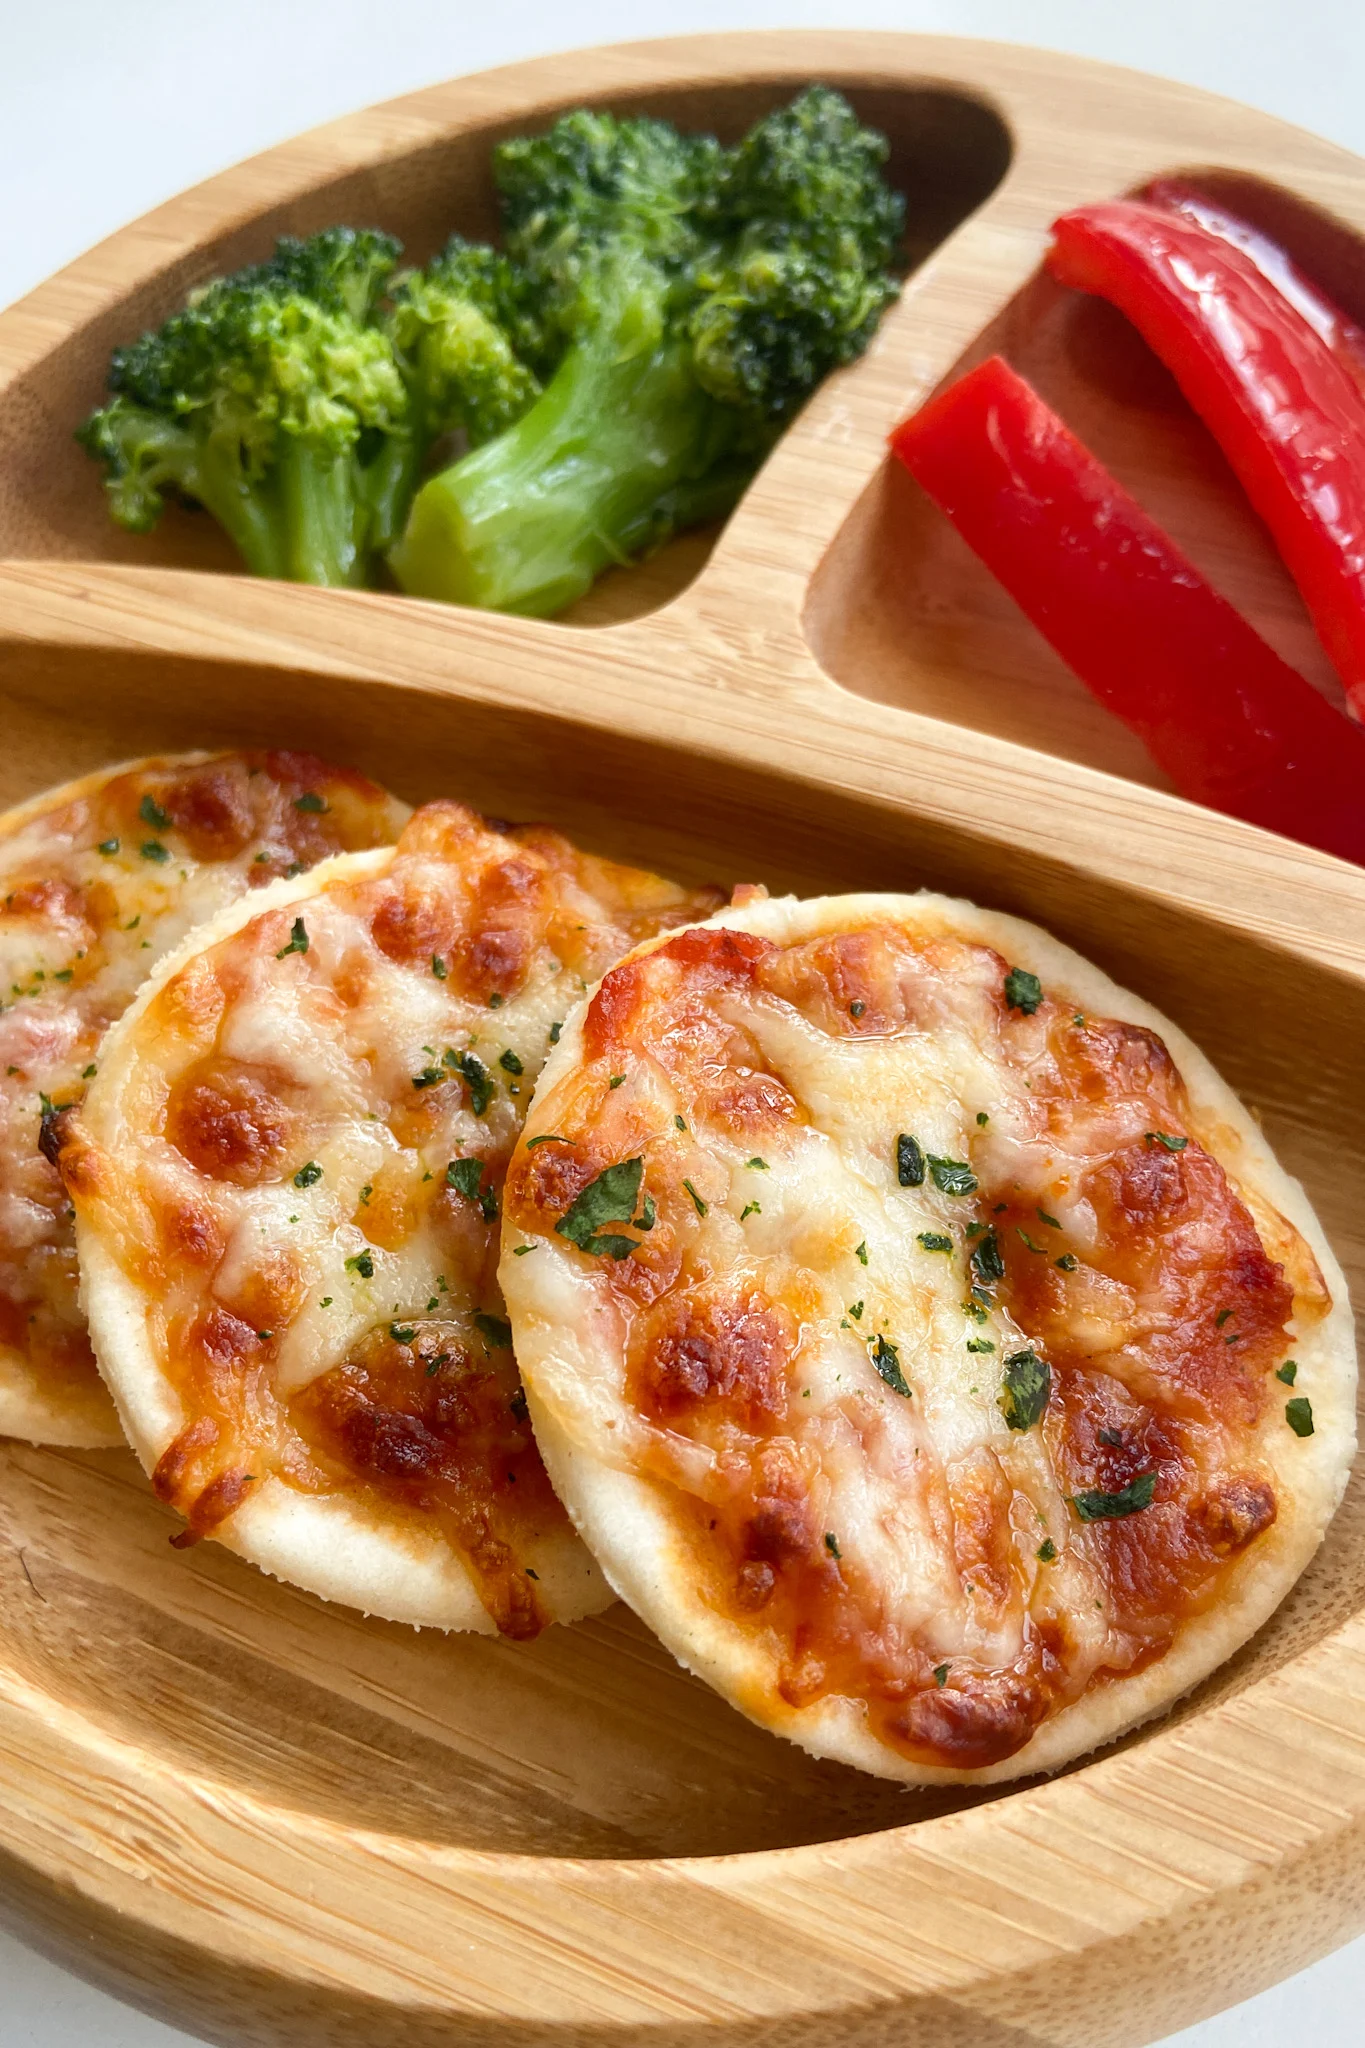 Homemade Mini Pizzas - Dinner for Toddlers